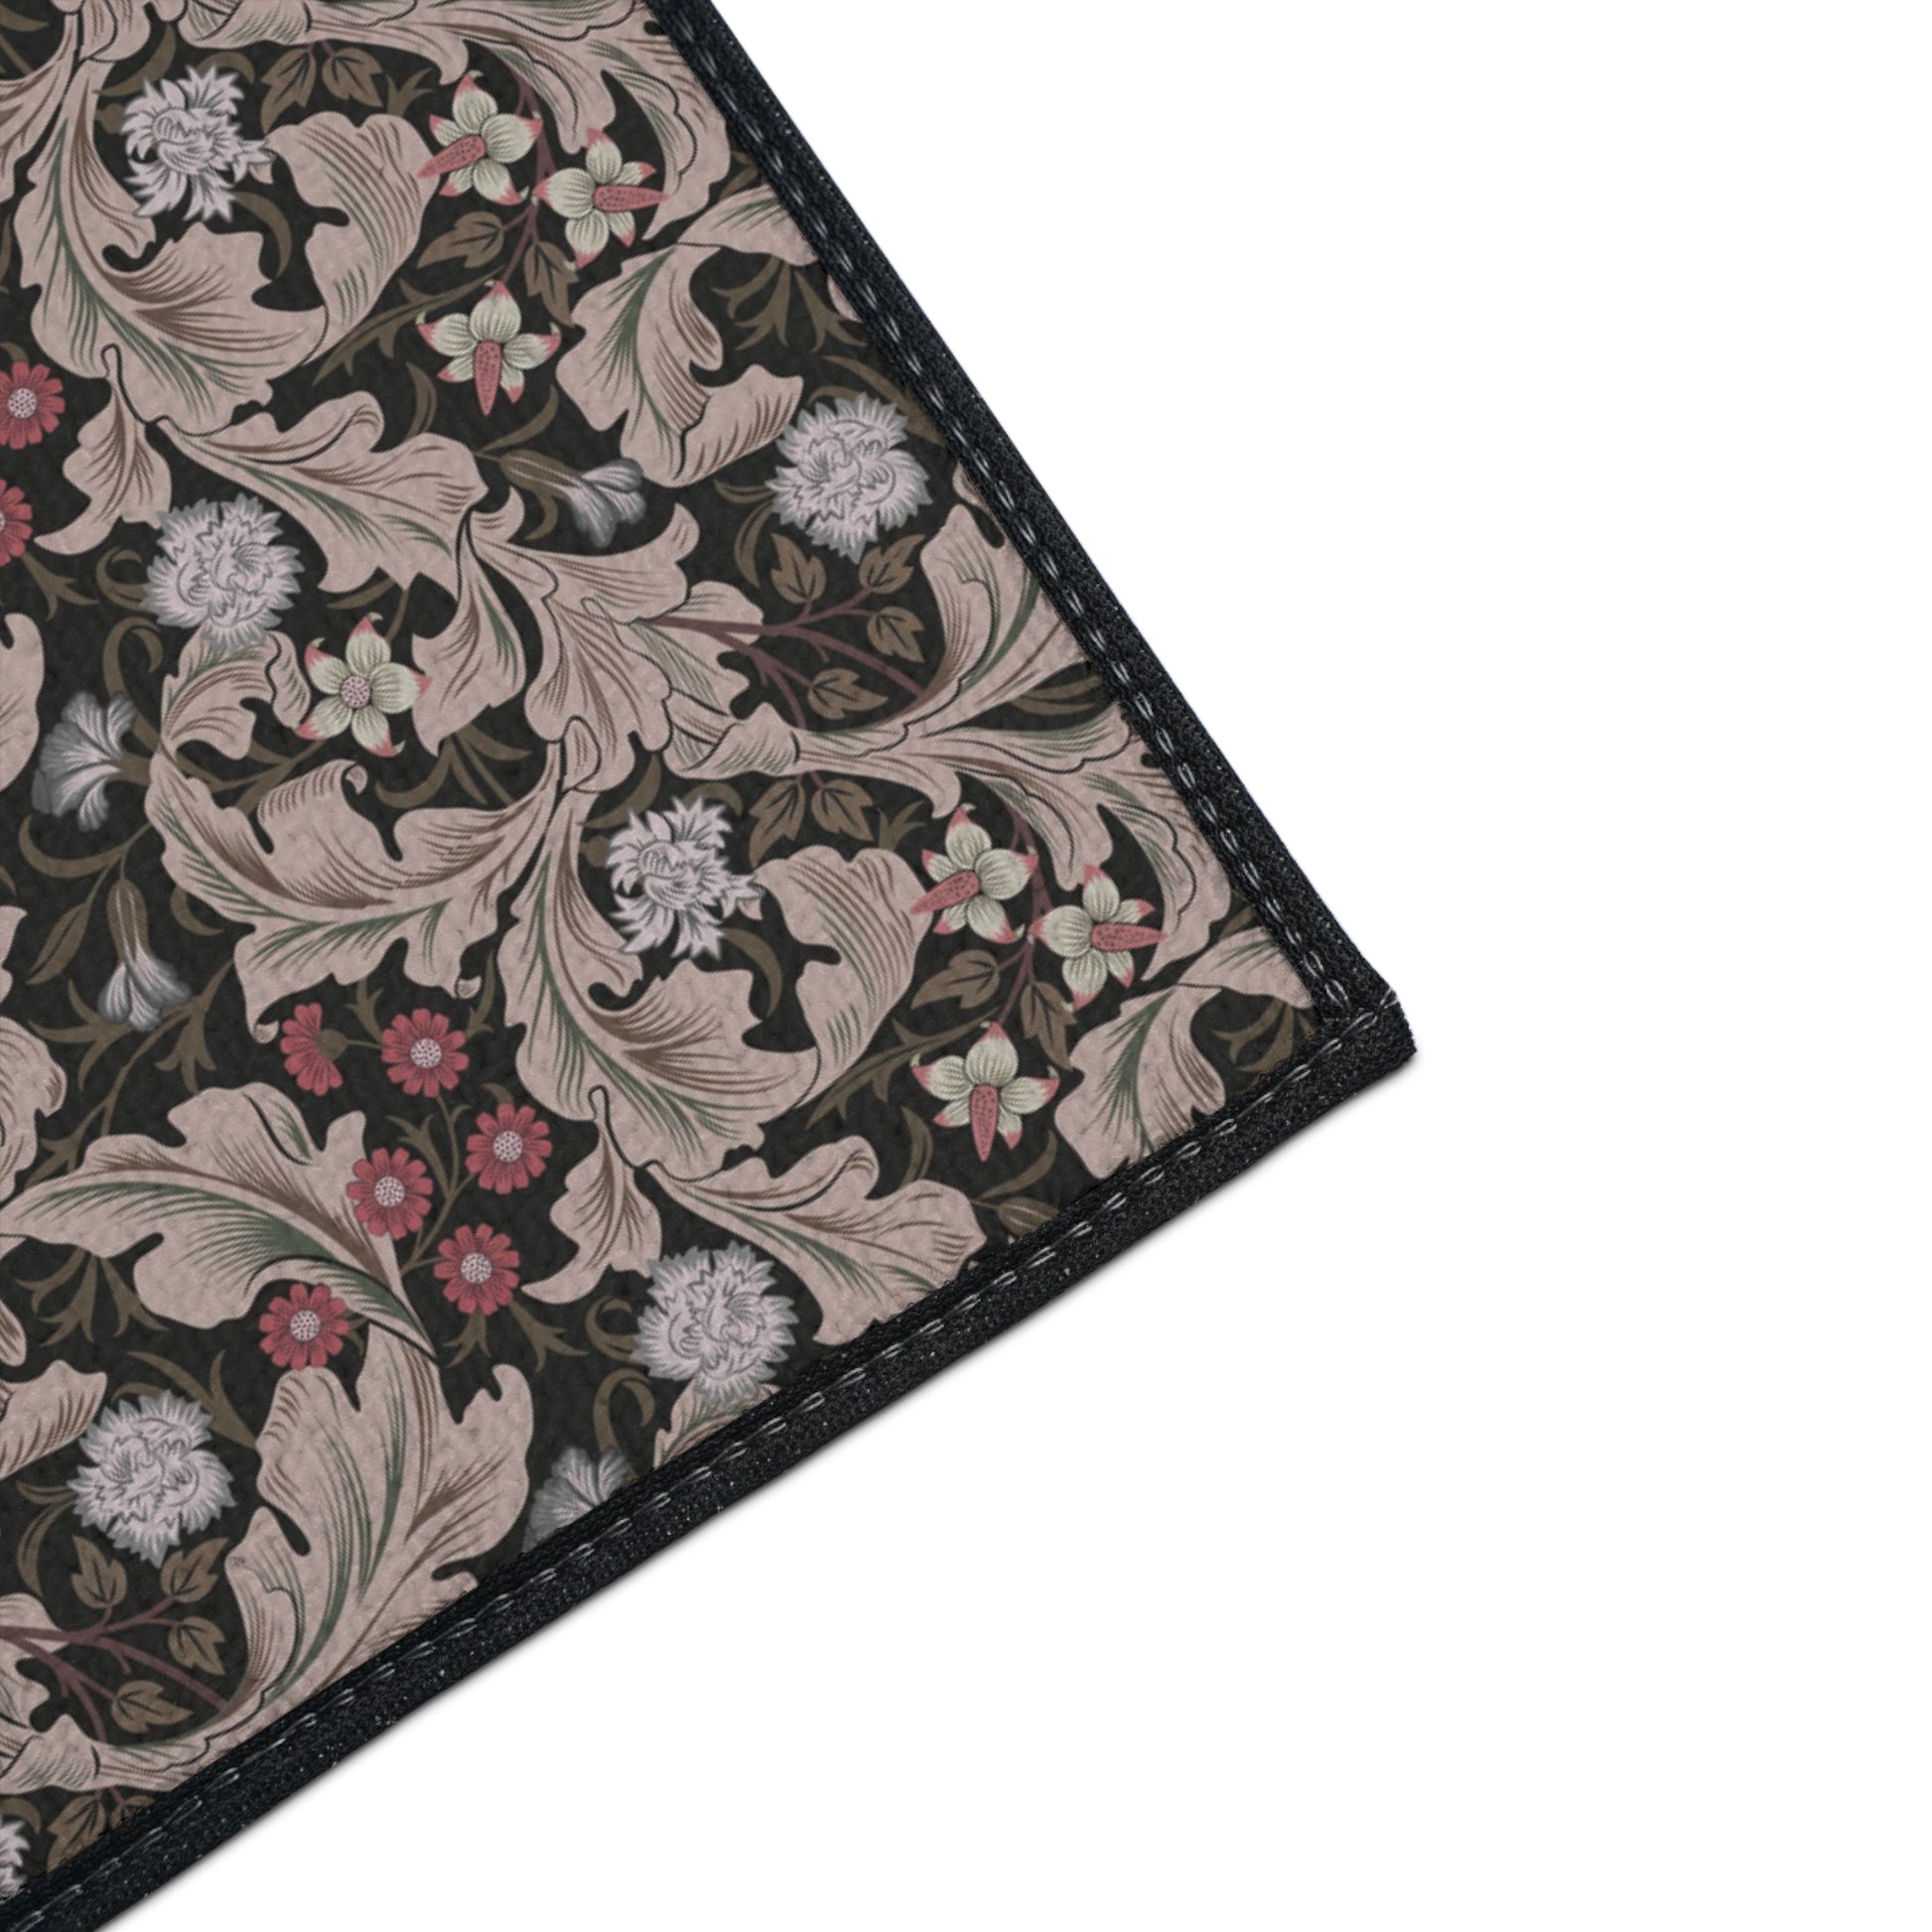 william-morris-co-heavy-duty-floor-mat-leicester-collection-mocha-18